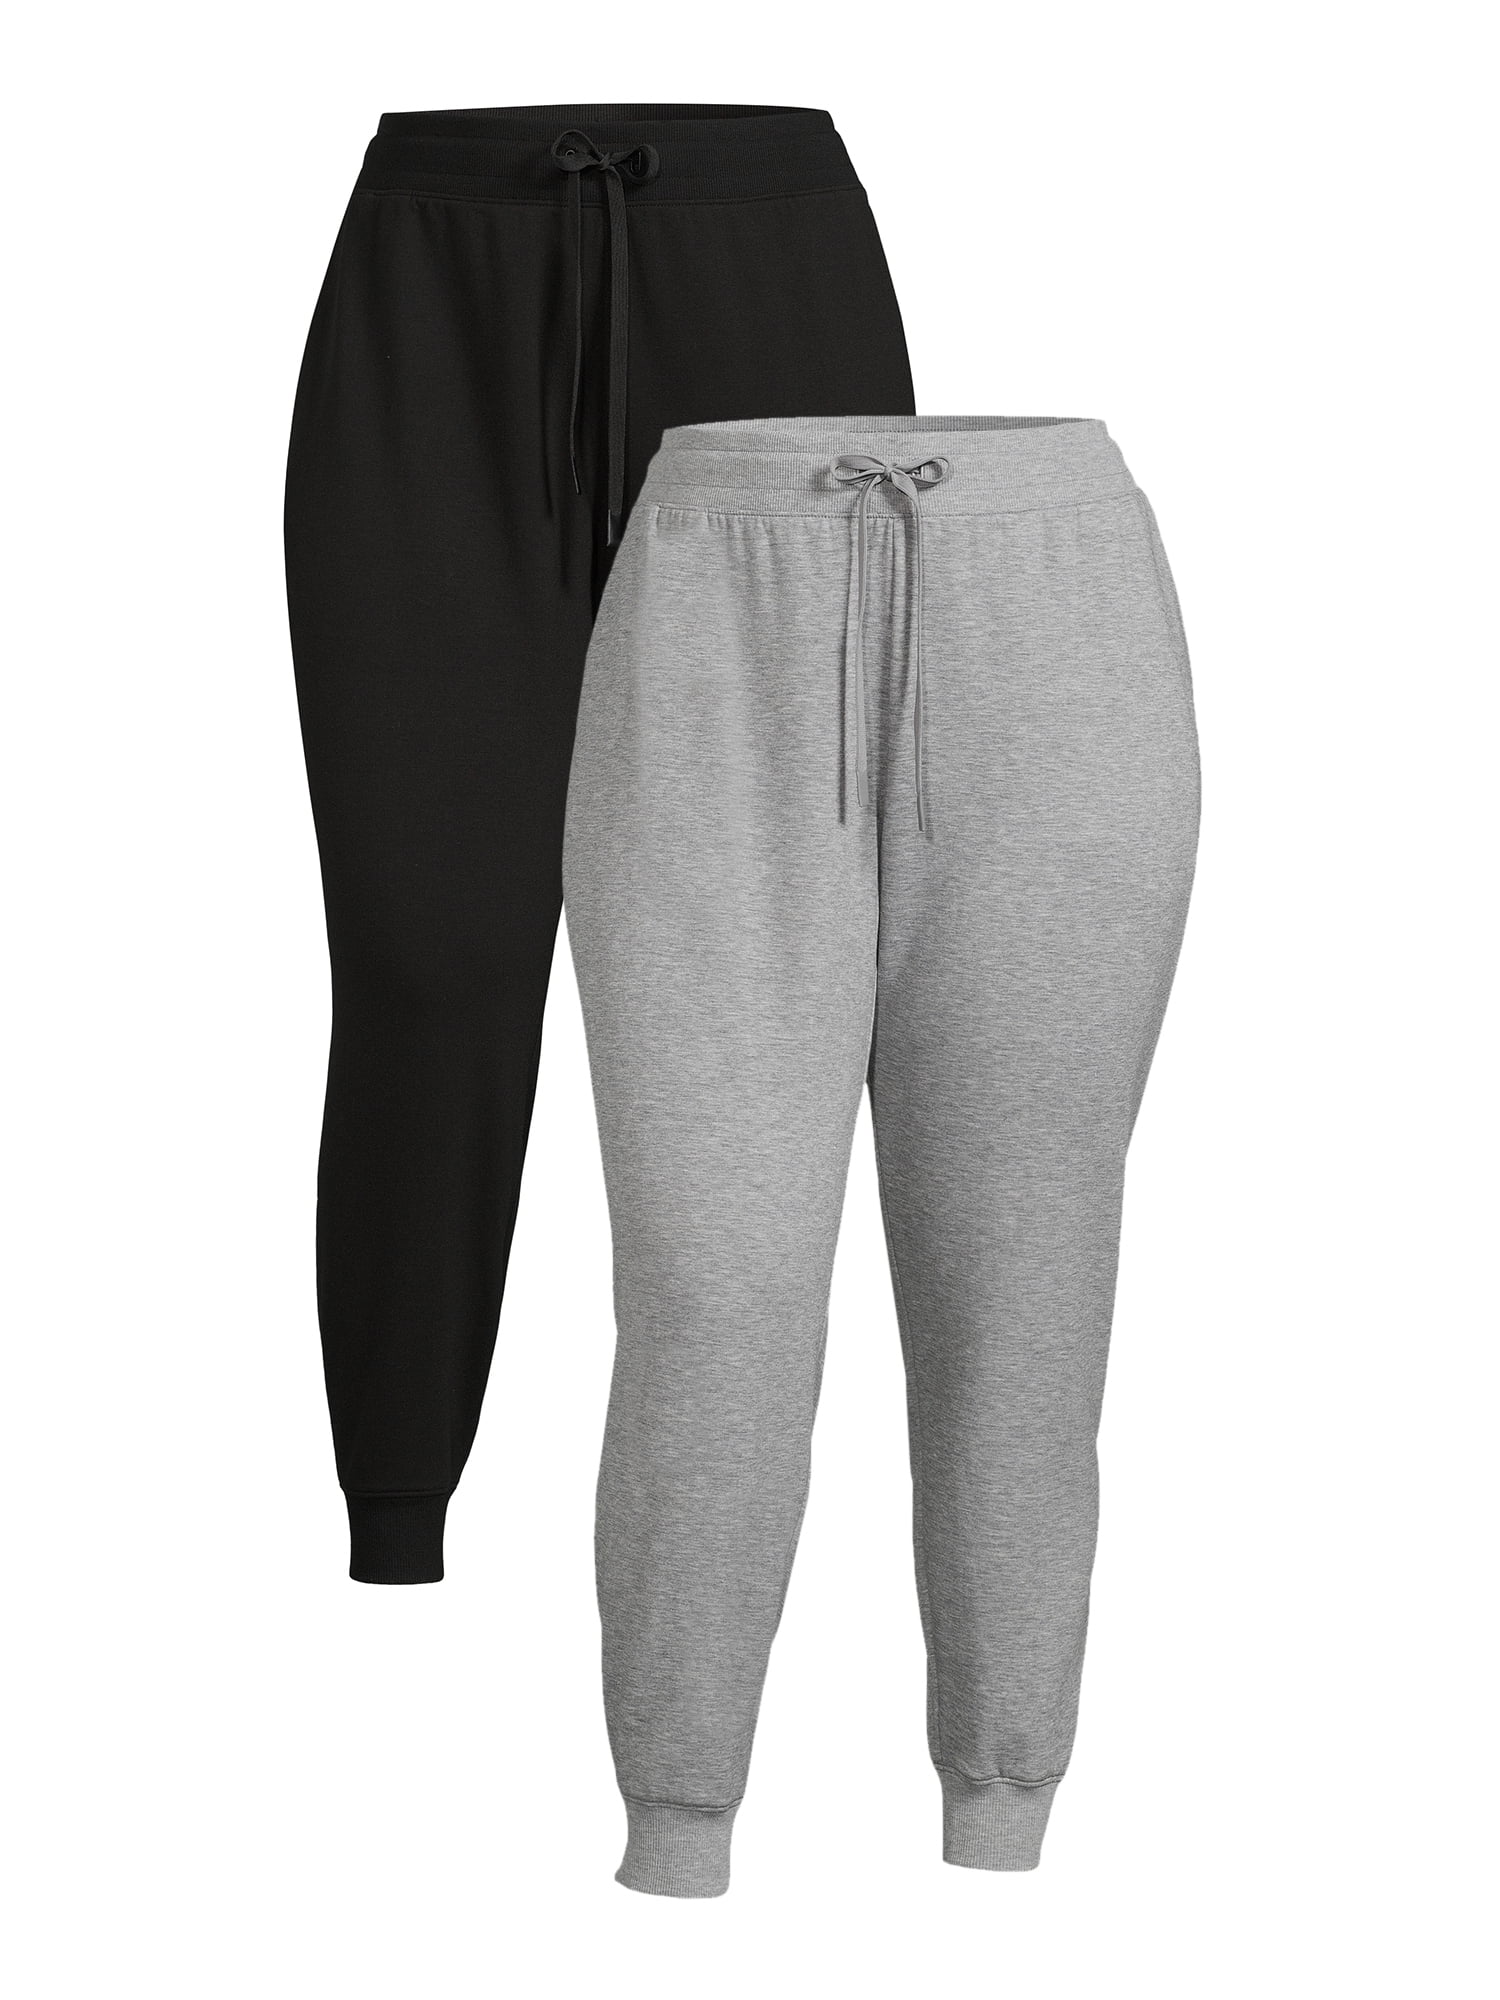 Athletic Works Women's Plus Size Jogger Pants with Pockets, 2-Pack